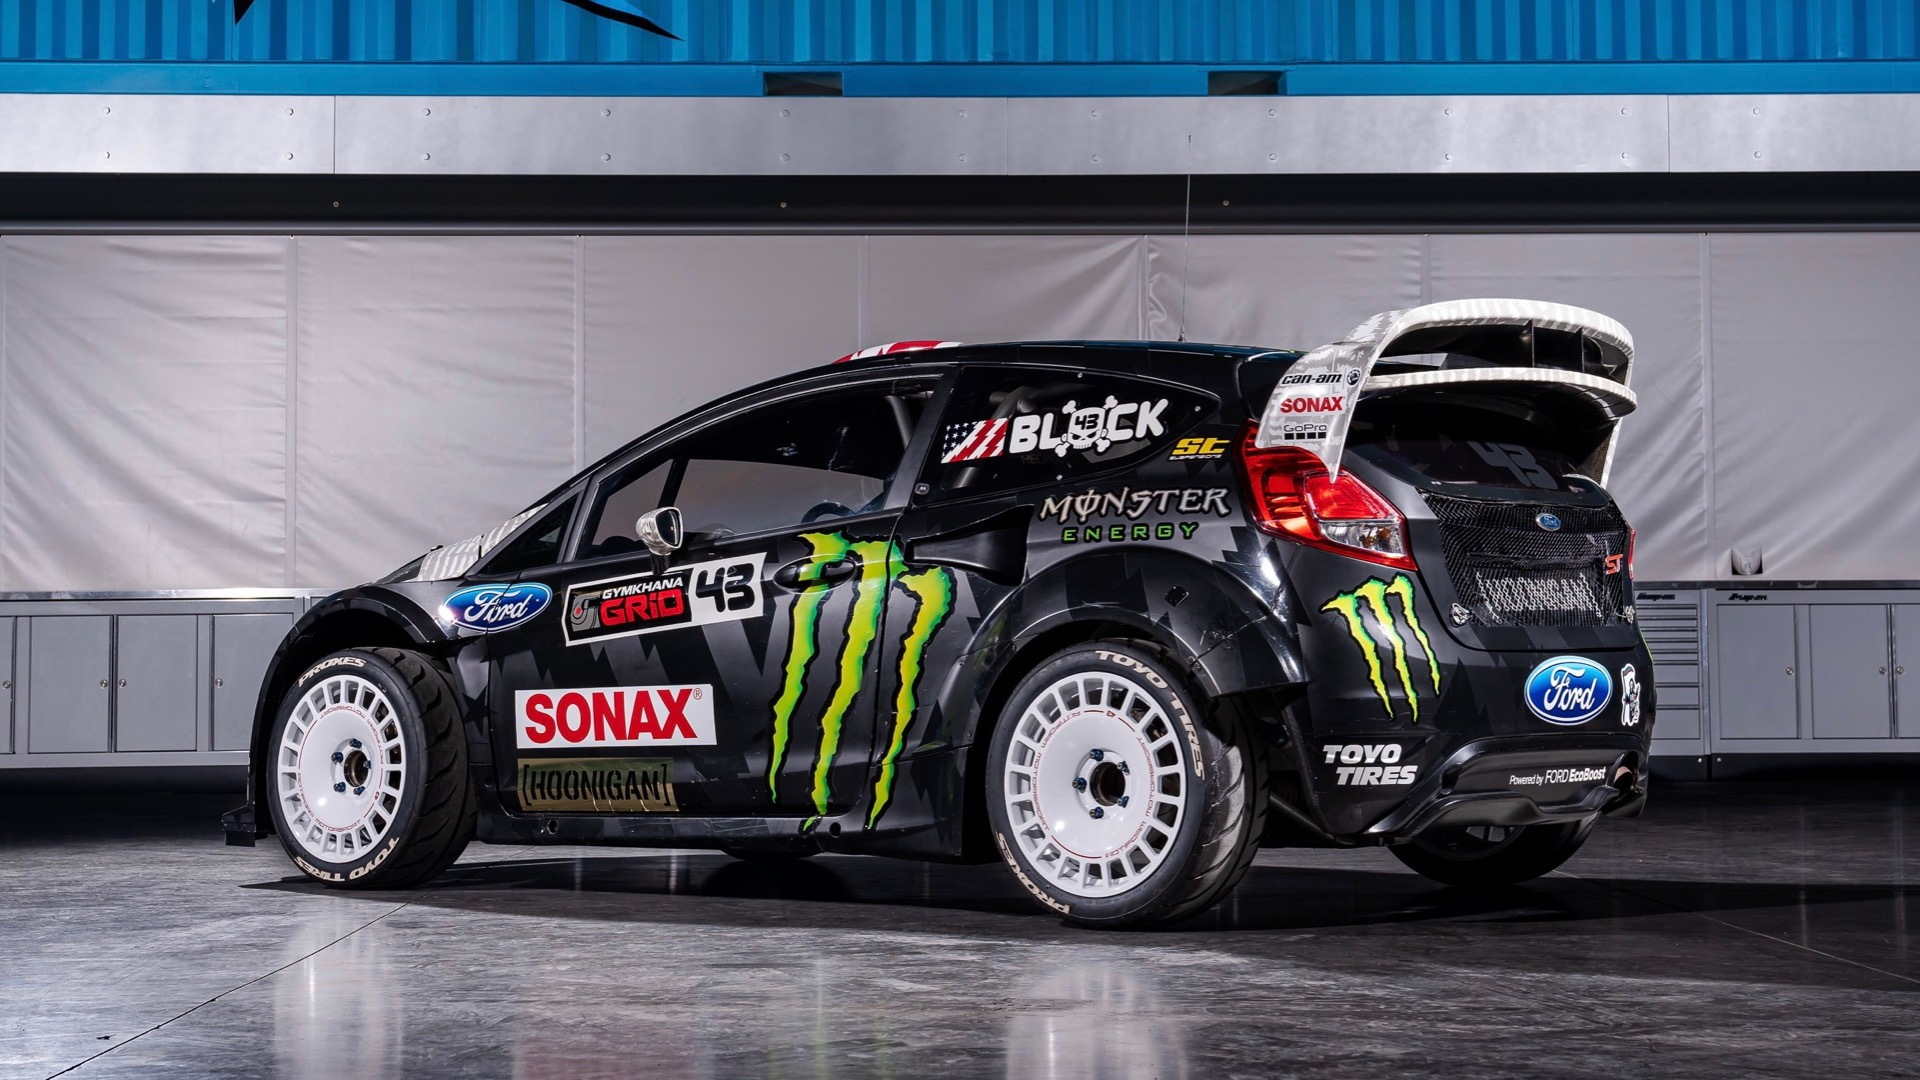 Ken Block's 2013 Ford Fiesta rally car (Photo by LBI Limited)